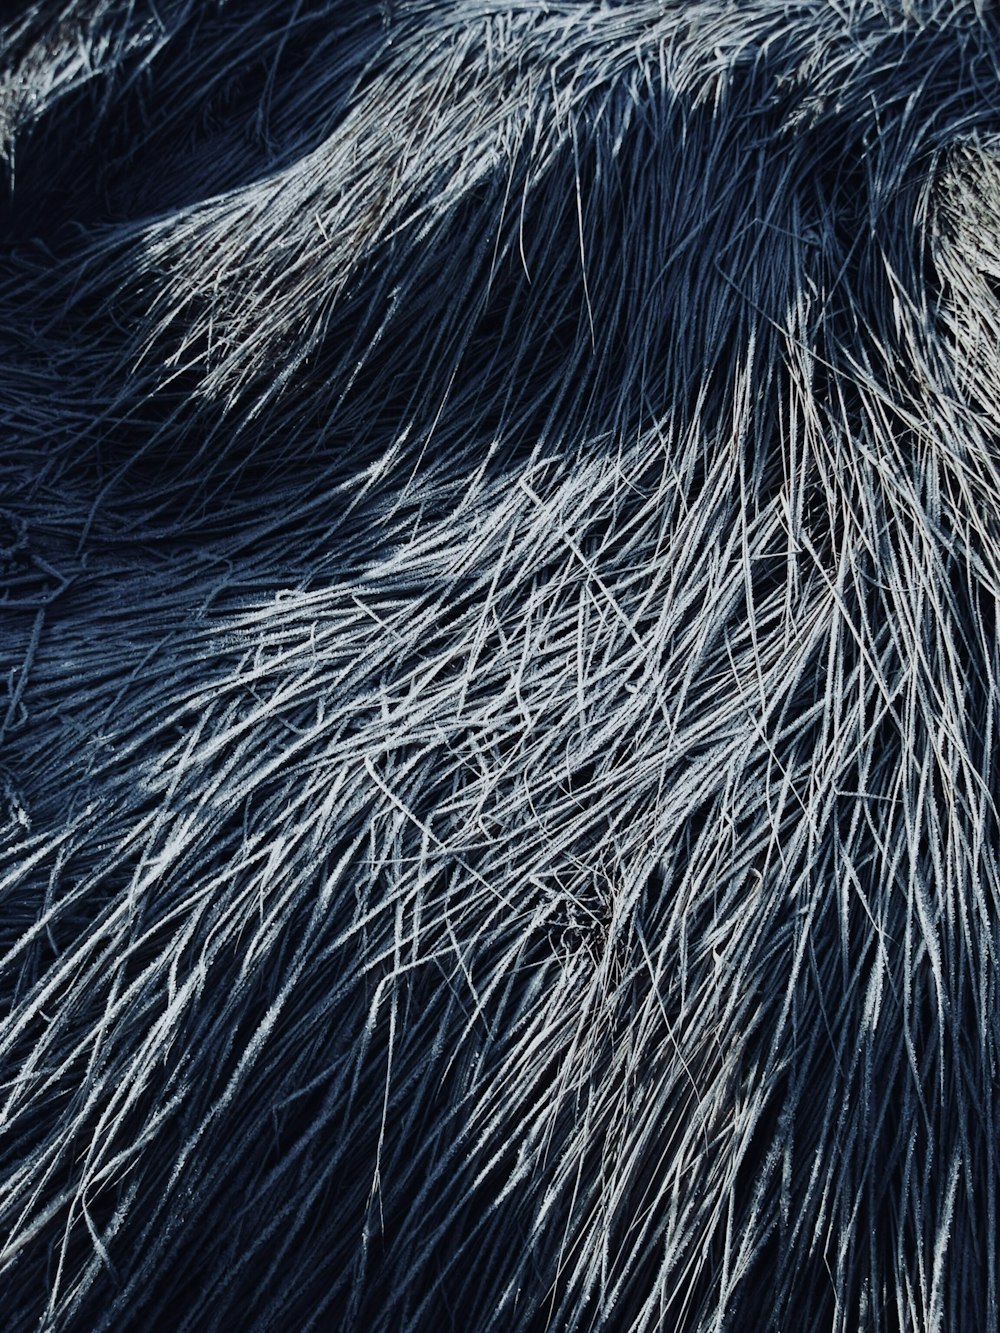 a close up of a person's hair